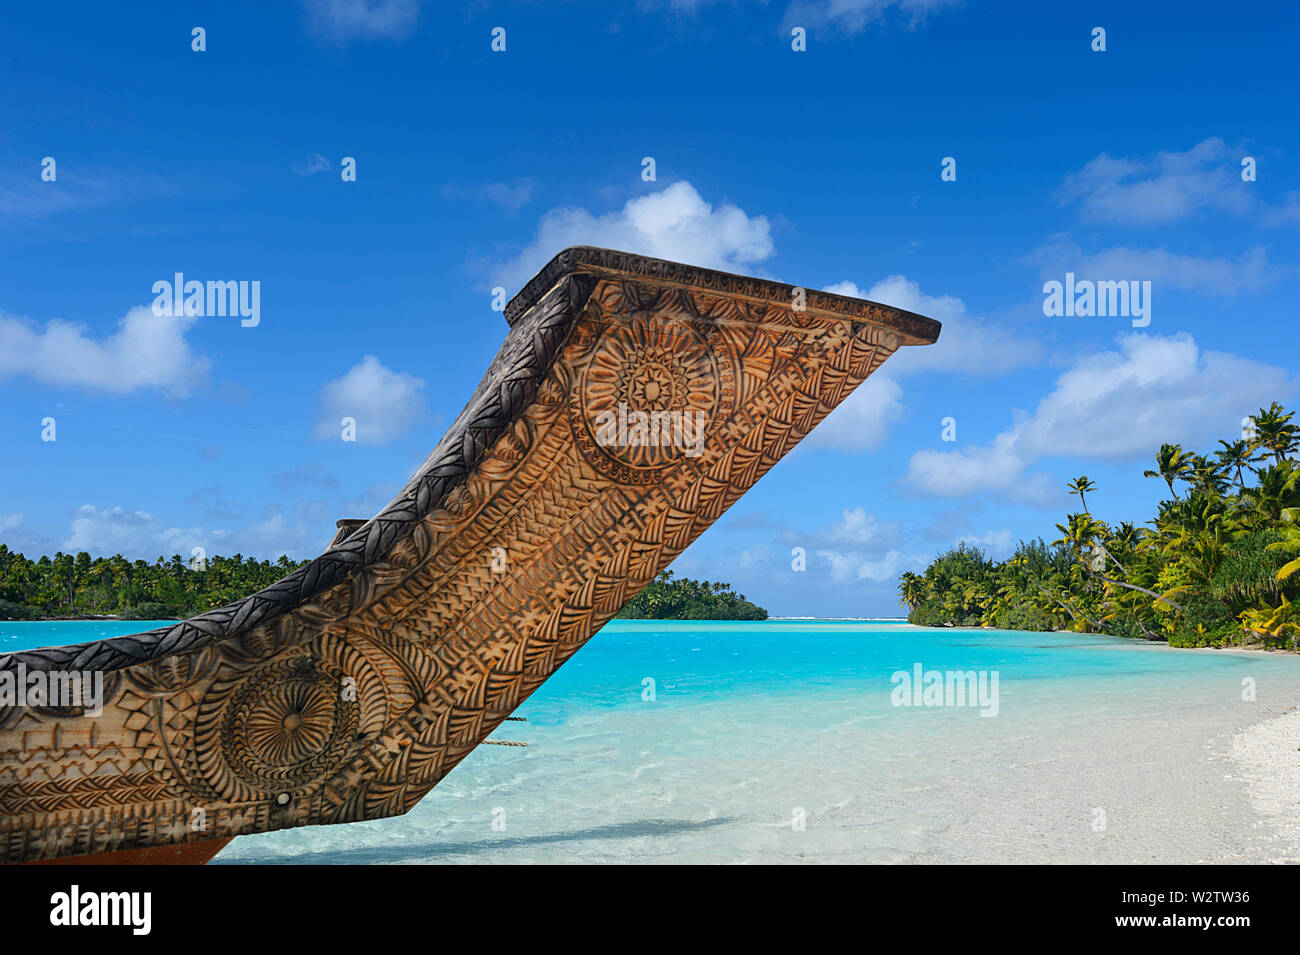 Carved prow of a Polynesian vessel moored on the turquoise coral  lagoon of Aitutaki, Cook Islands, Polynesia Stock Photo